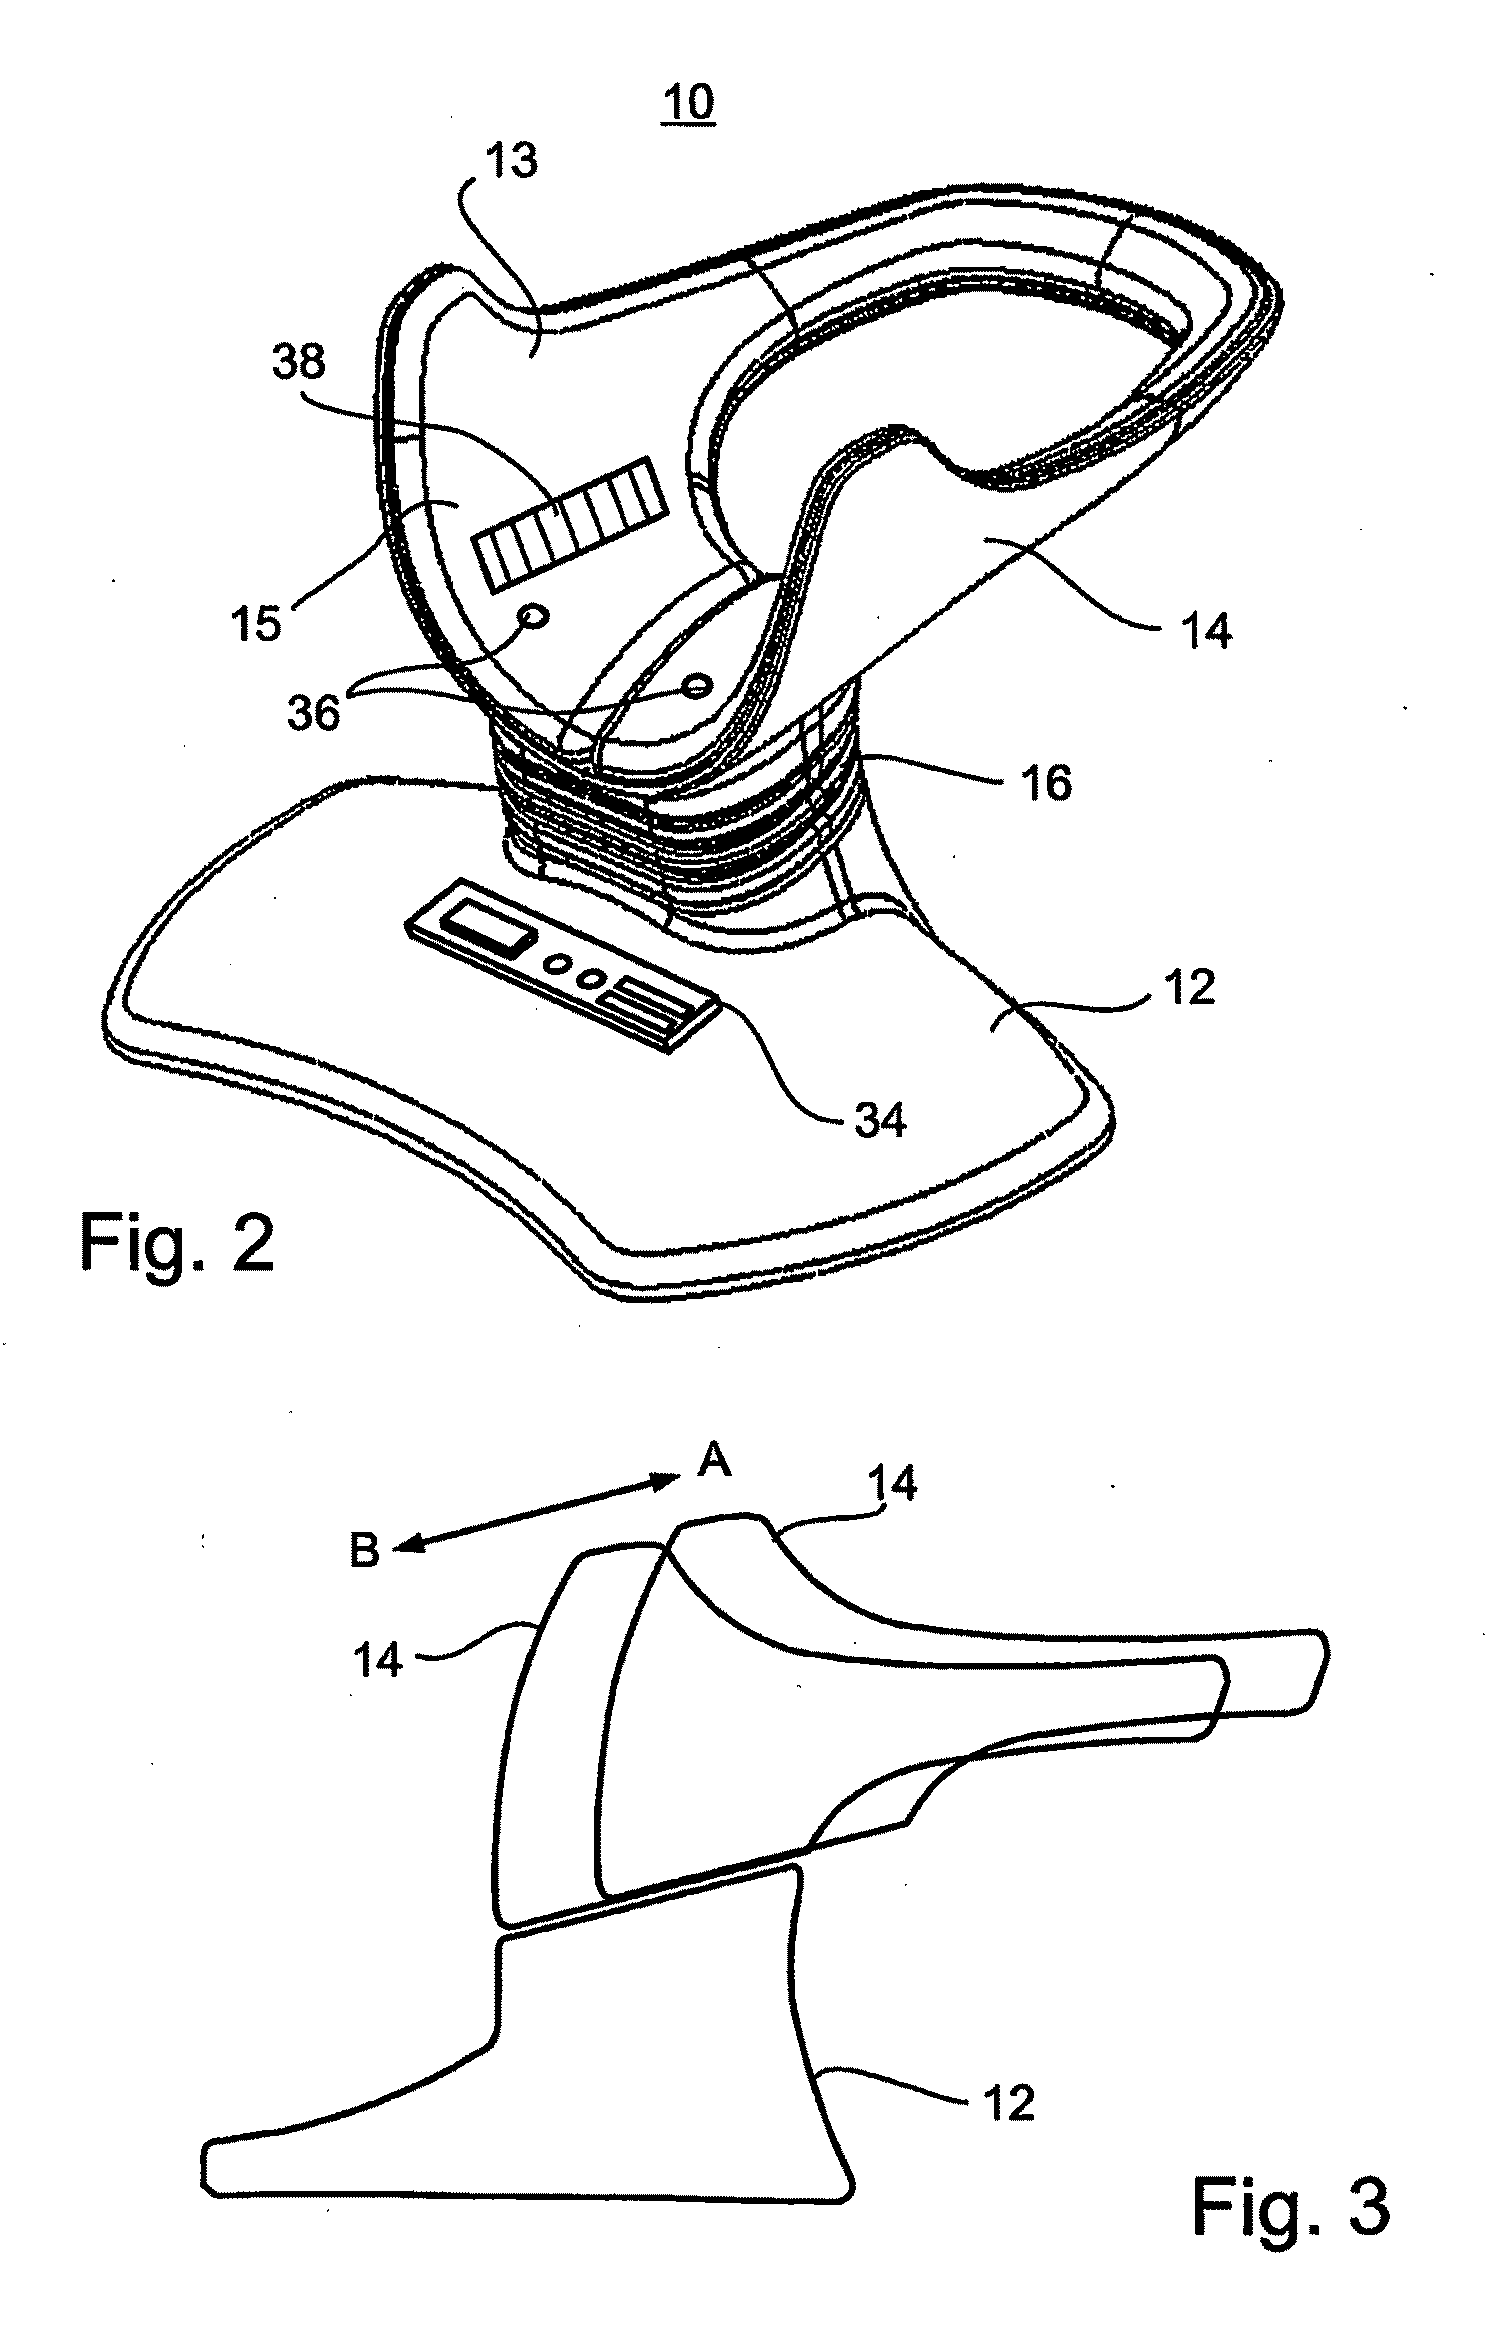 Device and Method for Treating Neck Tension or Neck Injury